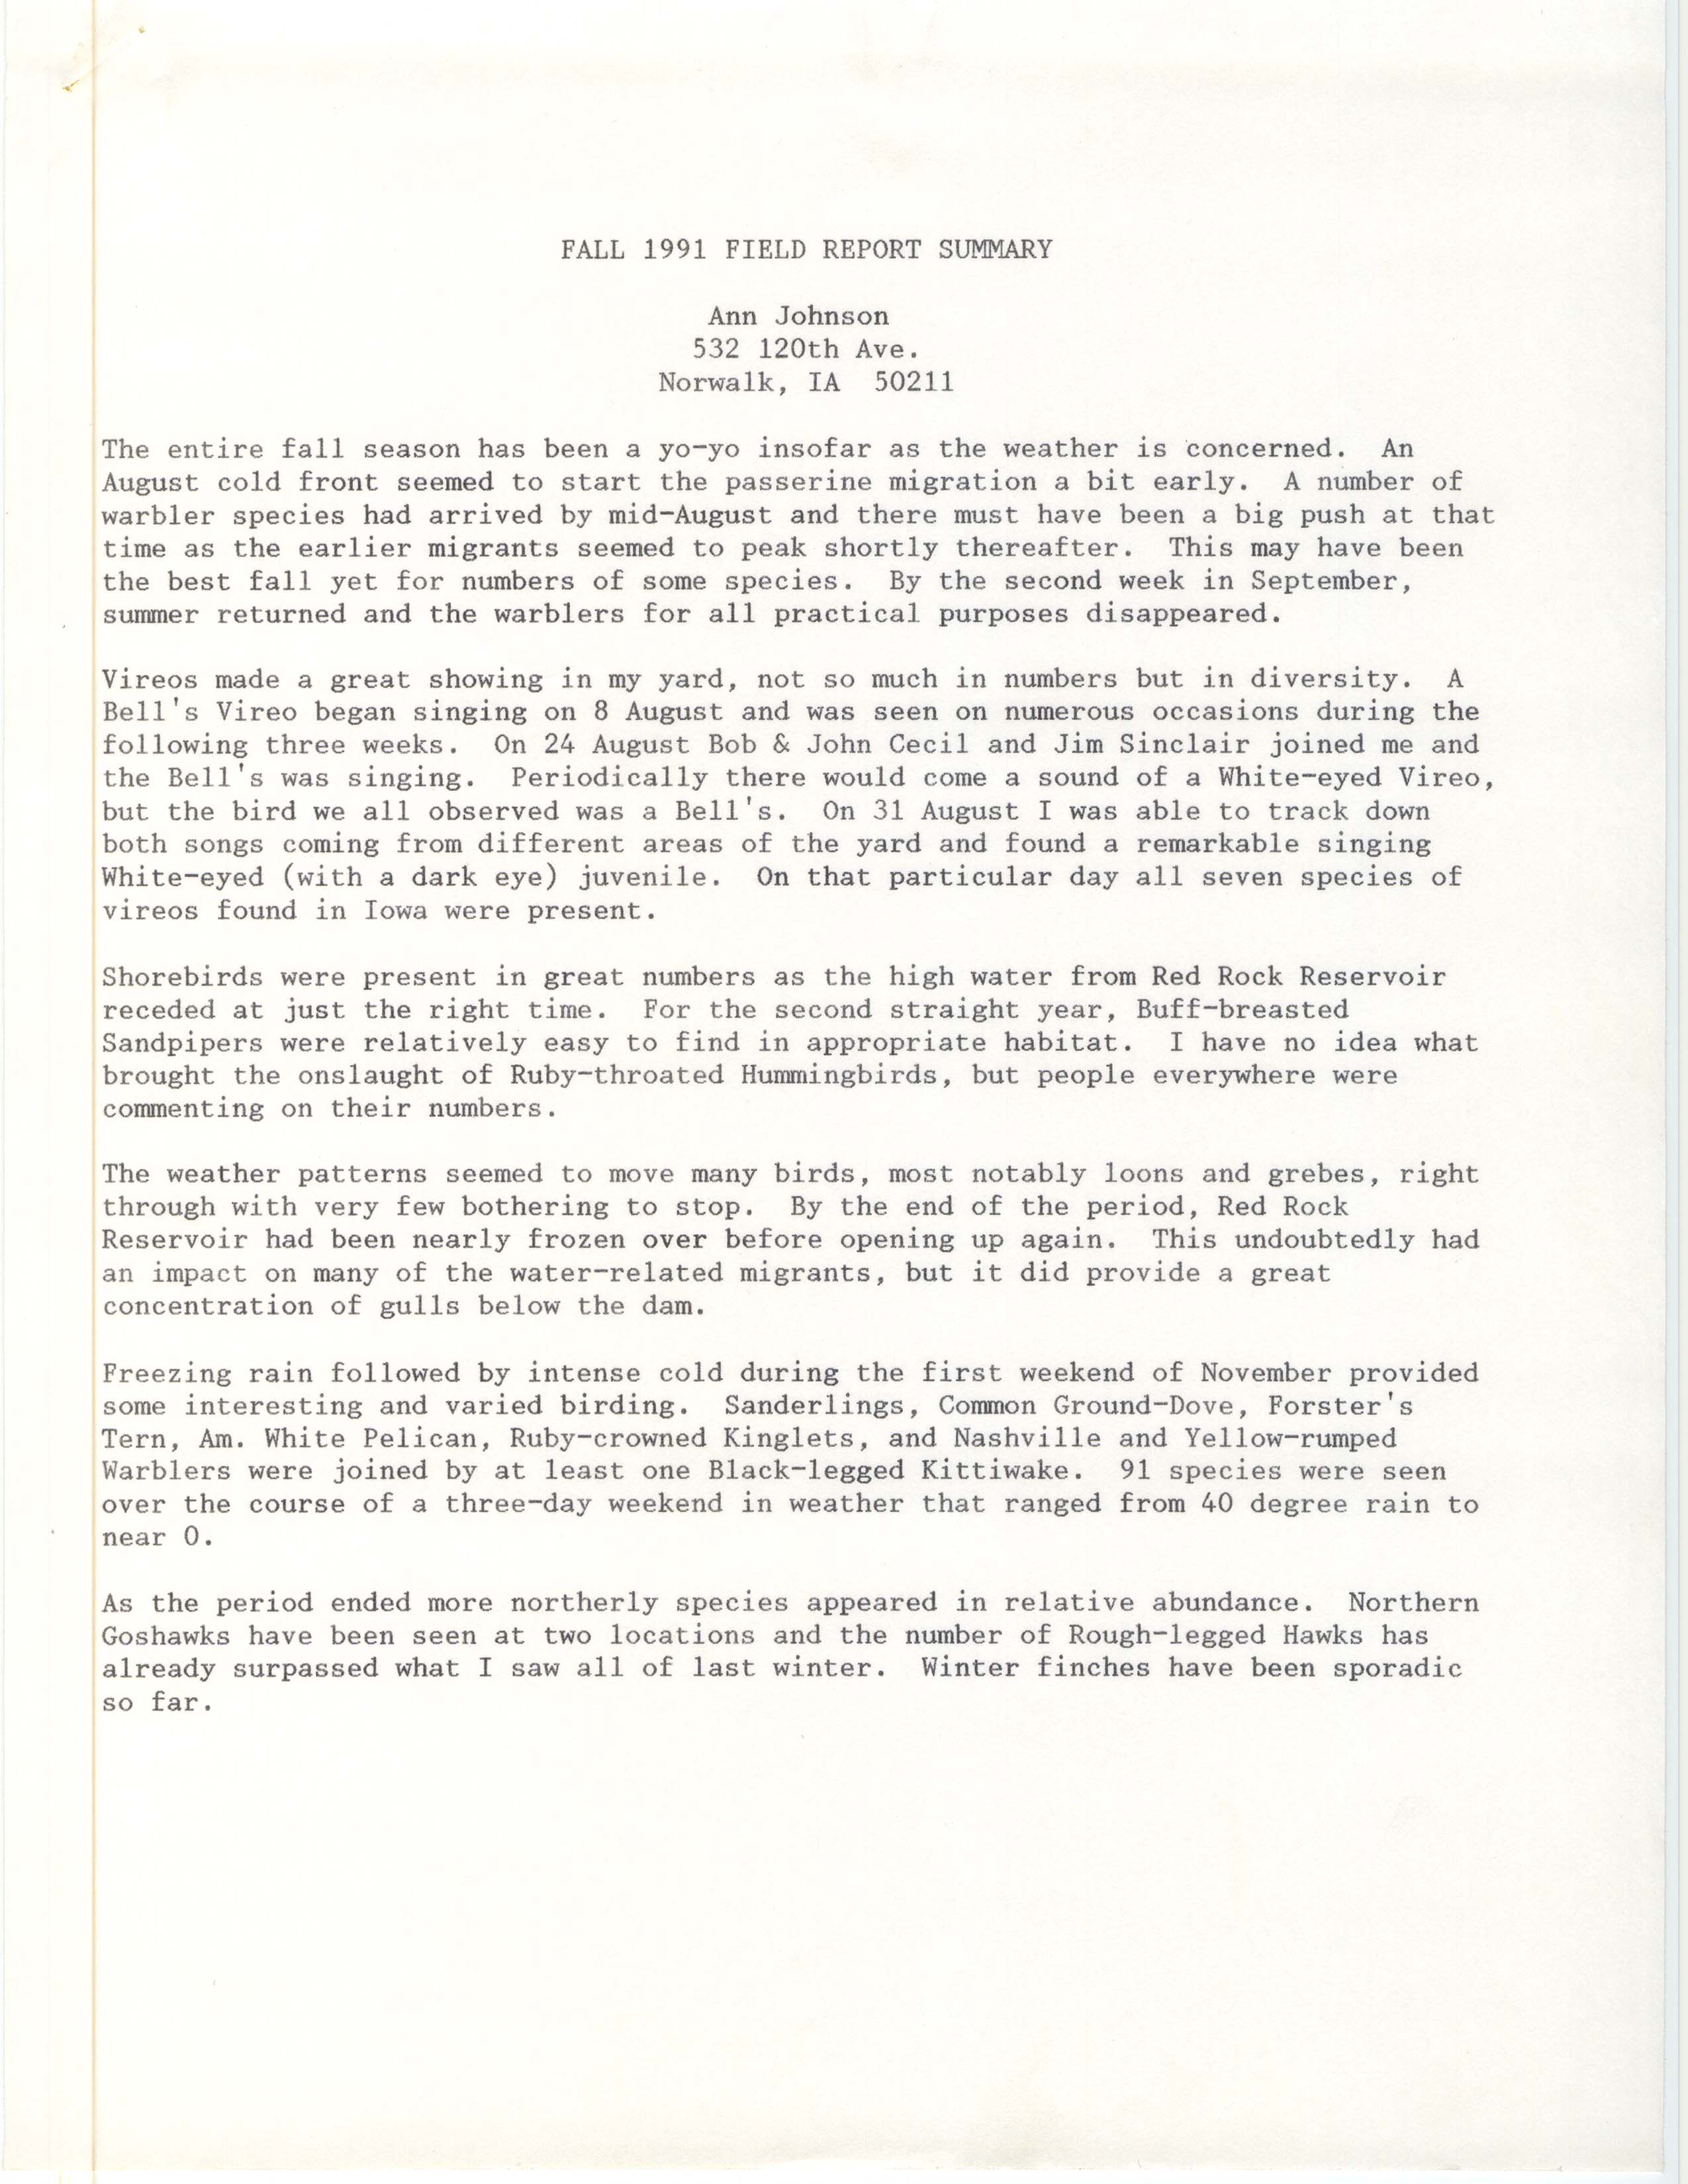 Field notes and Ann Johnson letter to the editor, fall 1991